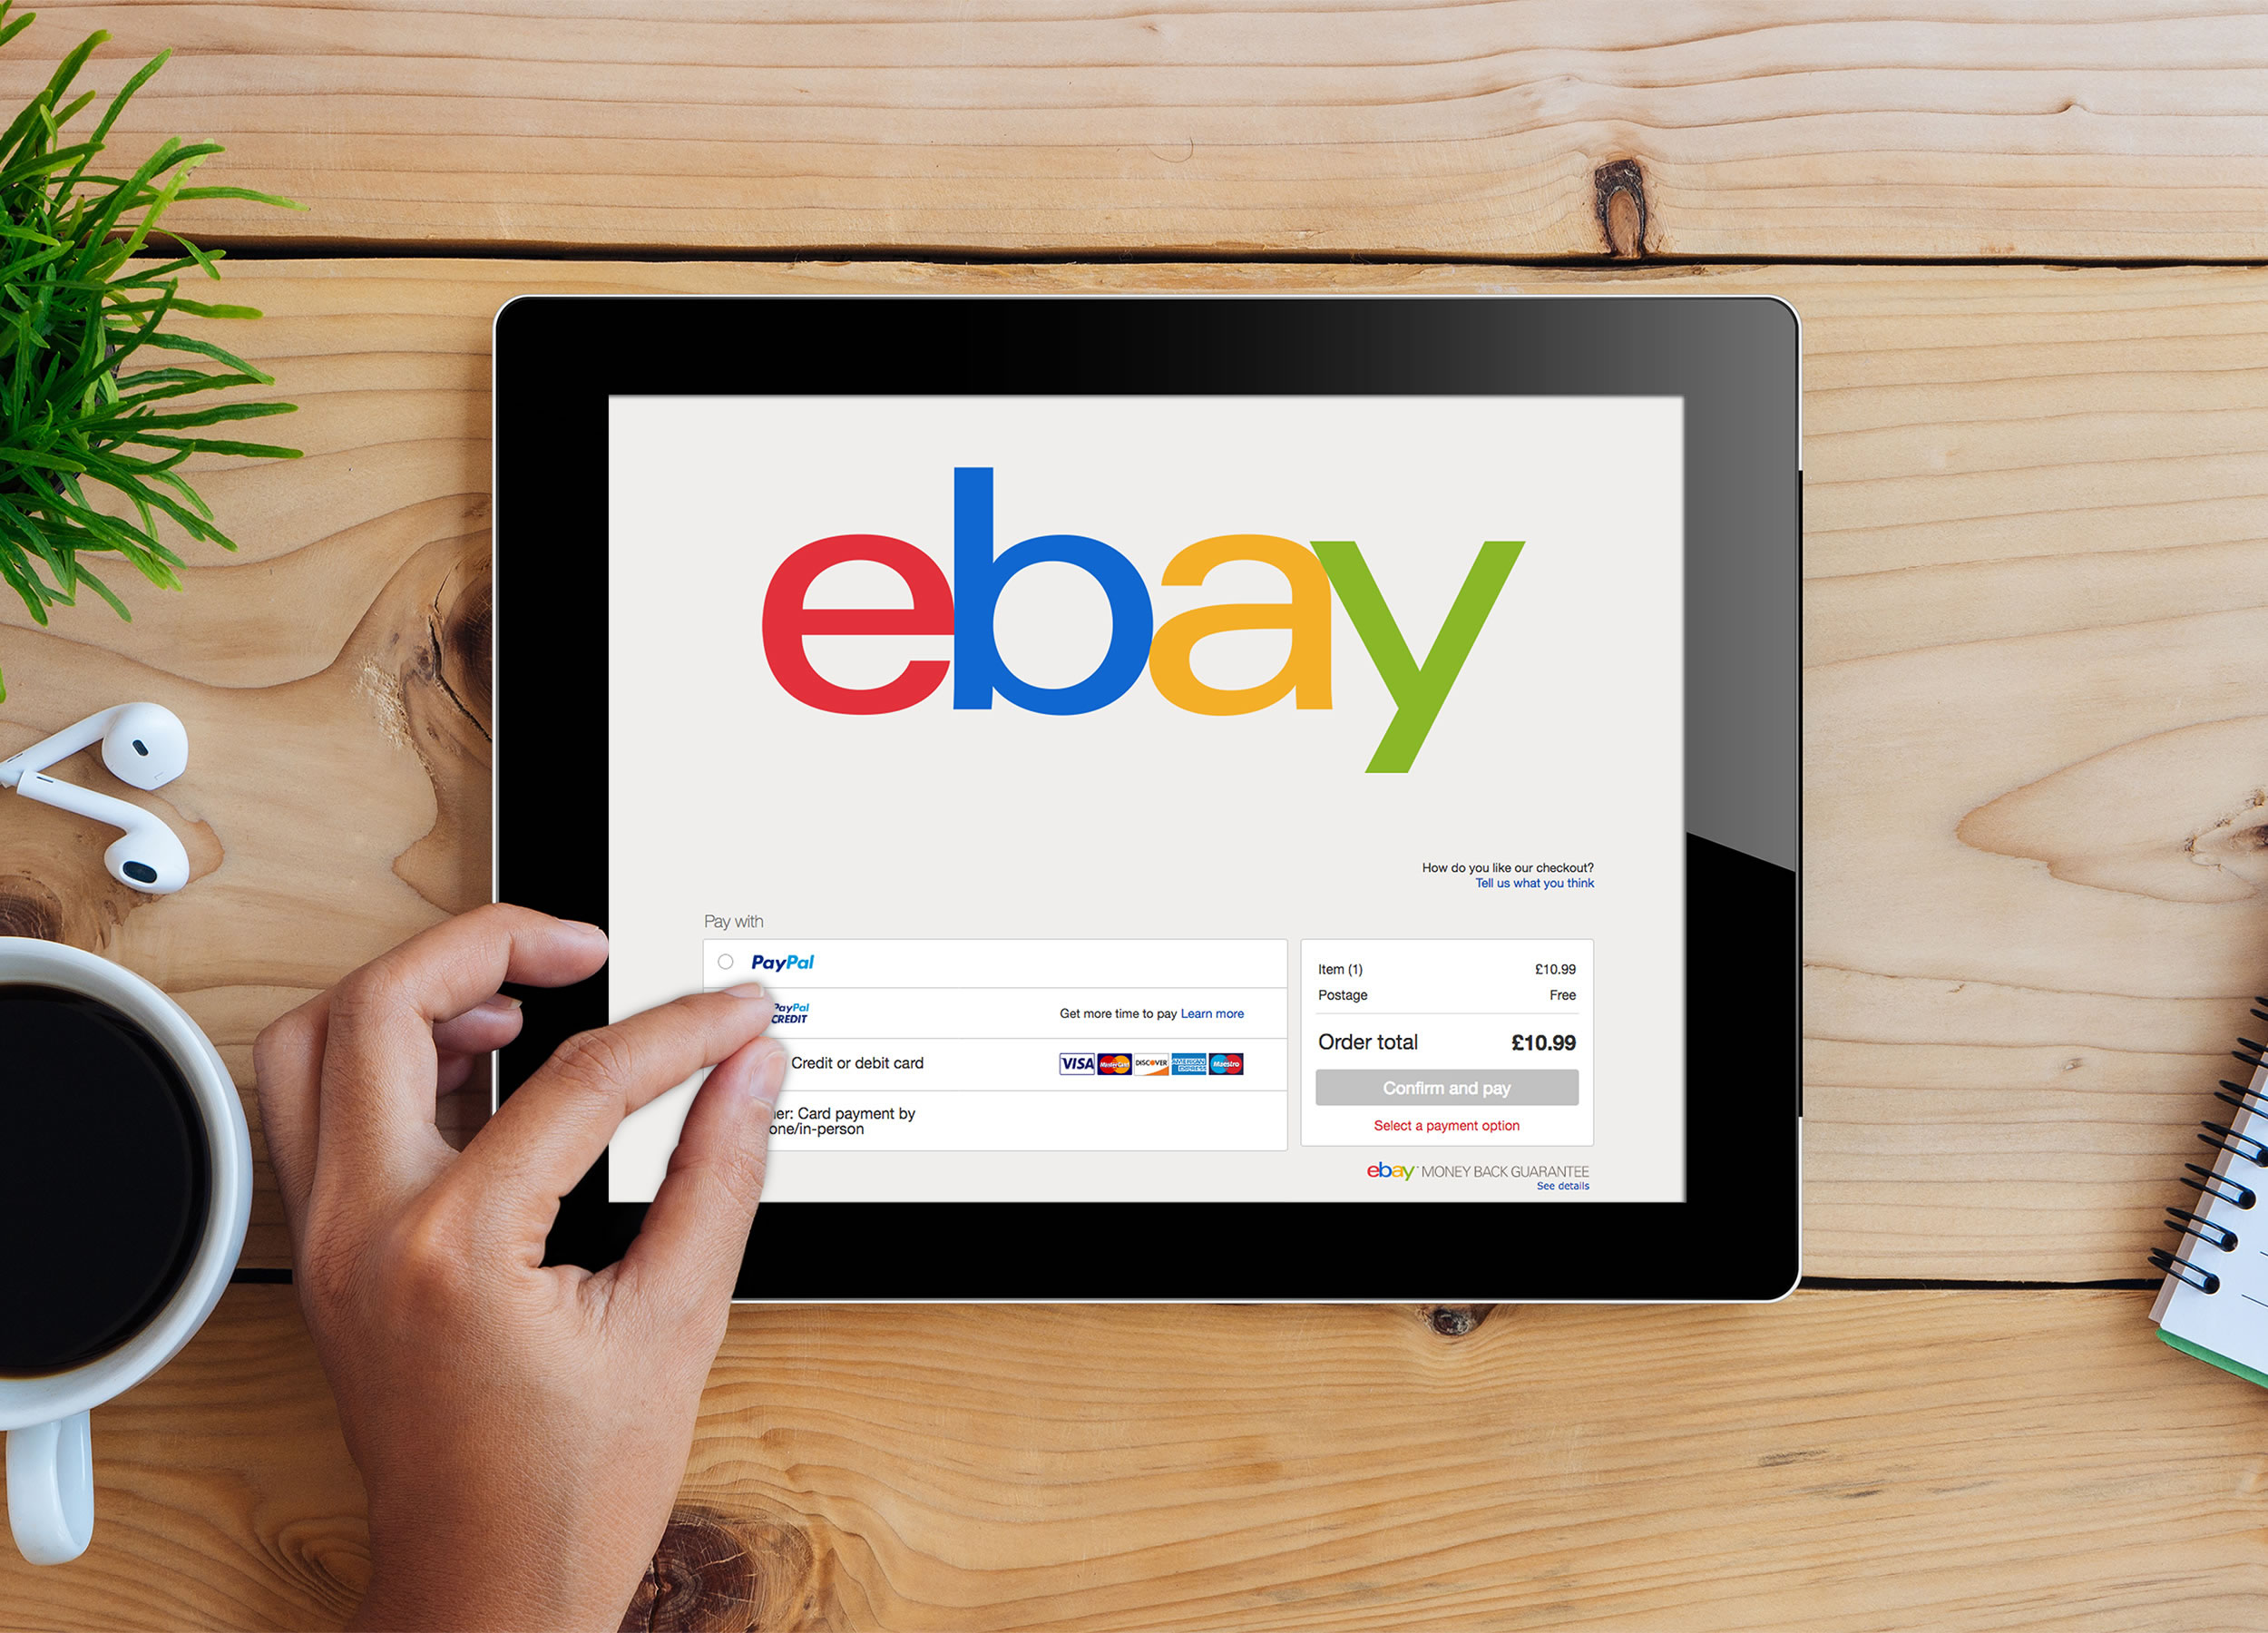 ebay to drop PayPal as primary payment provider